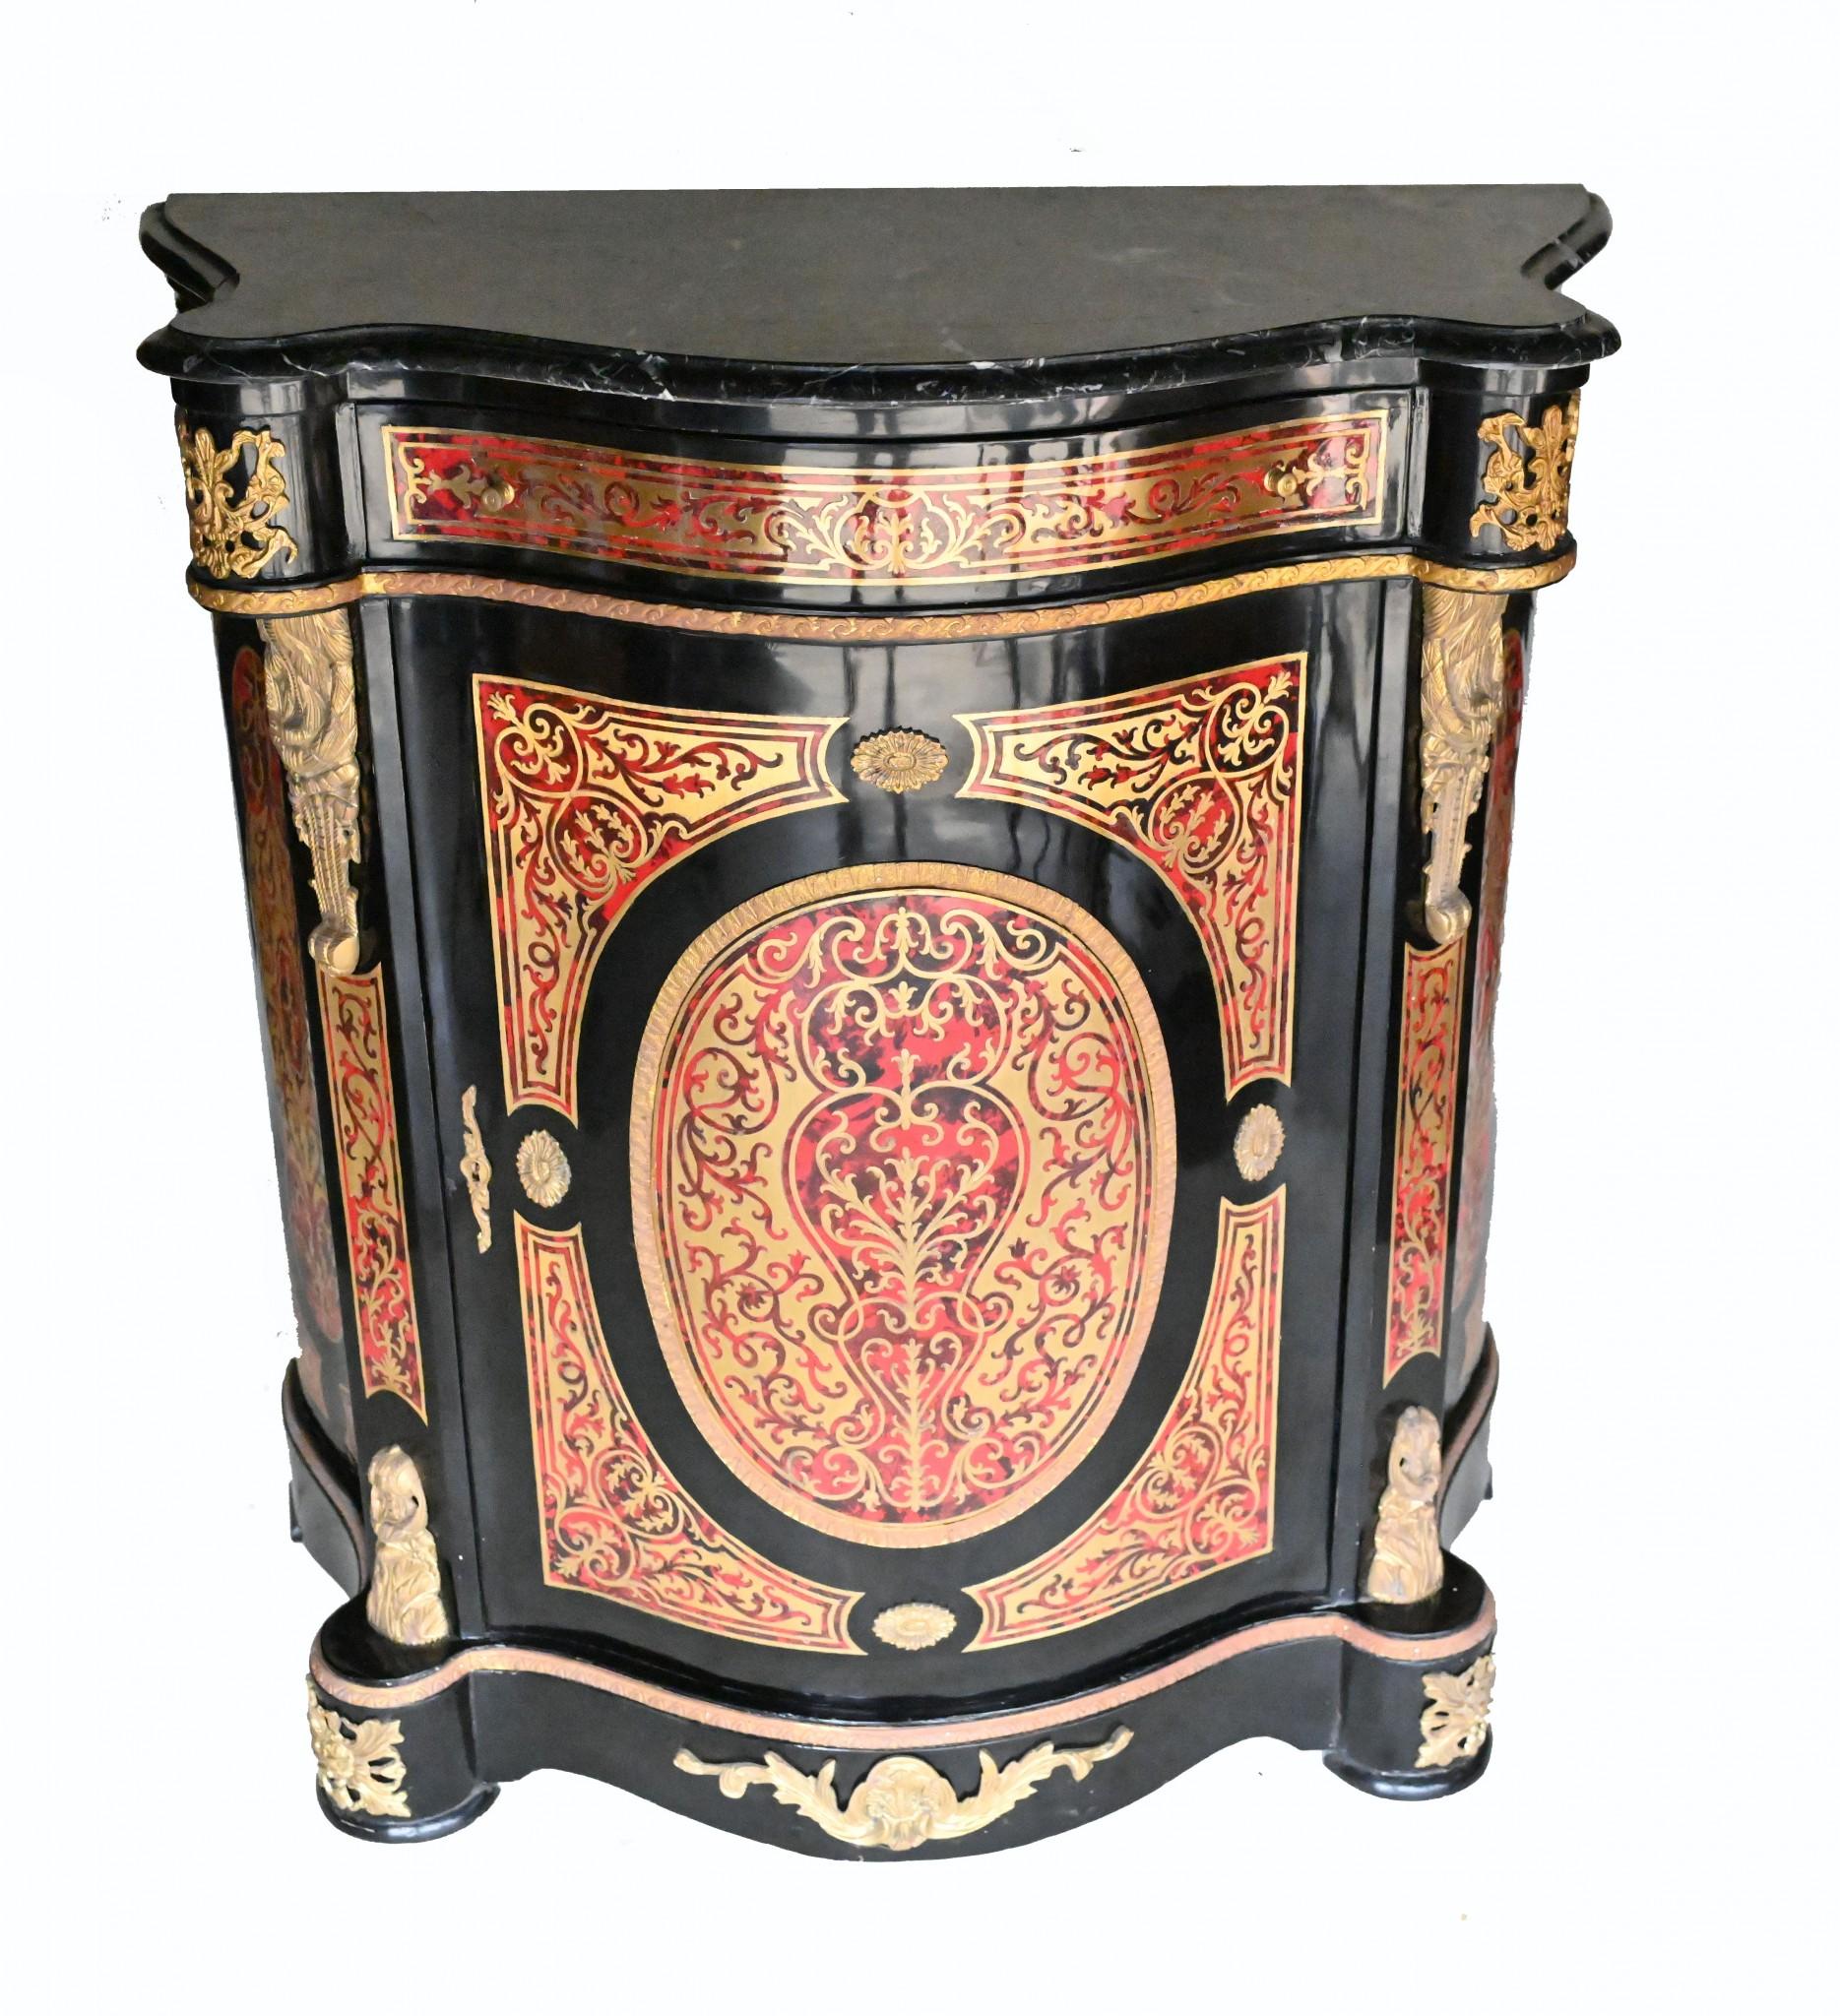 Stunning single French Boulle style inlay cabinet
Typical Boulle inlay with the hand cut brass over the ebony and faux tortoiseshell
Such a classic look, Charles Andre Boulle was the furniture maker of choice to Louis XVI
We also carry other pieces